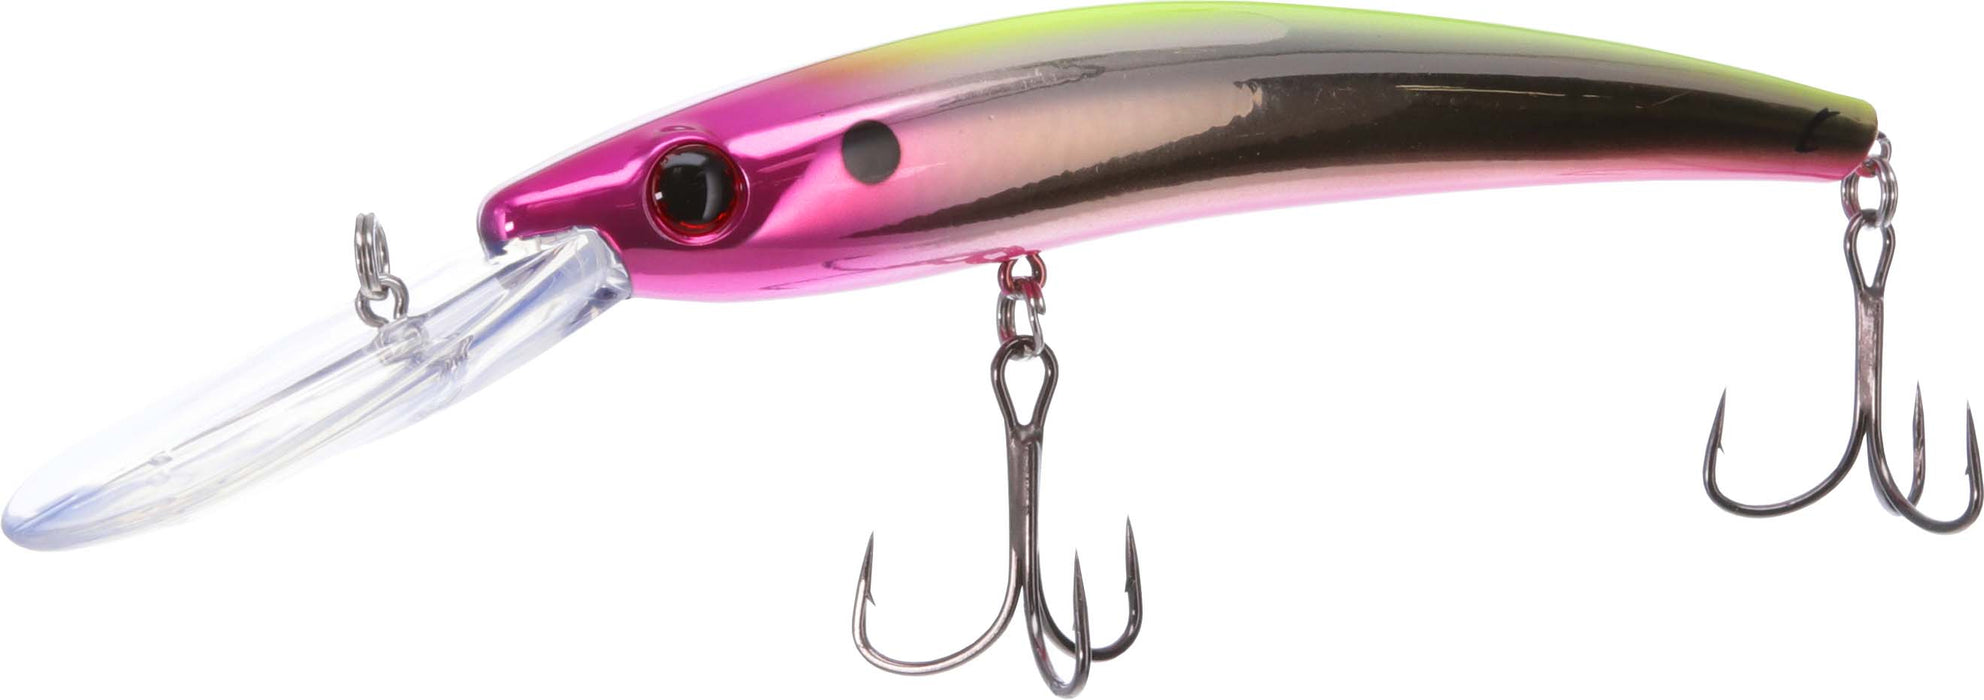 Lewis Fishing 305 Pink Weighted Set - TackleDirect